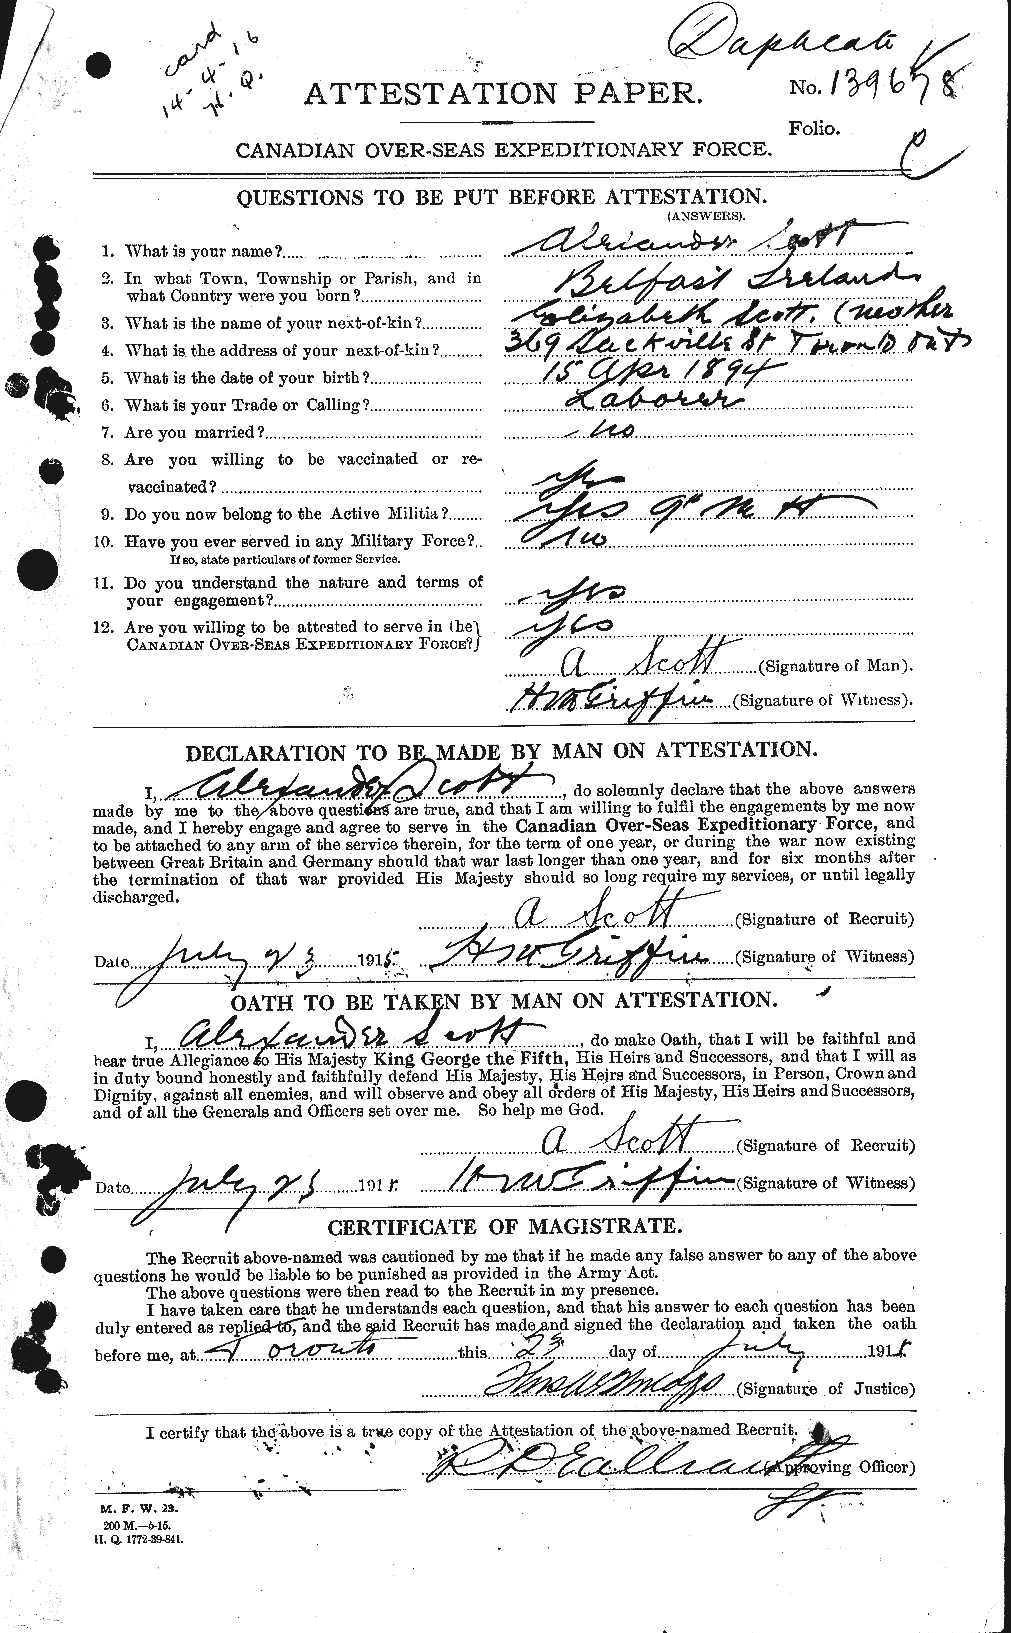 Personnel Records of the First World War - CEF 086609a